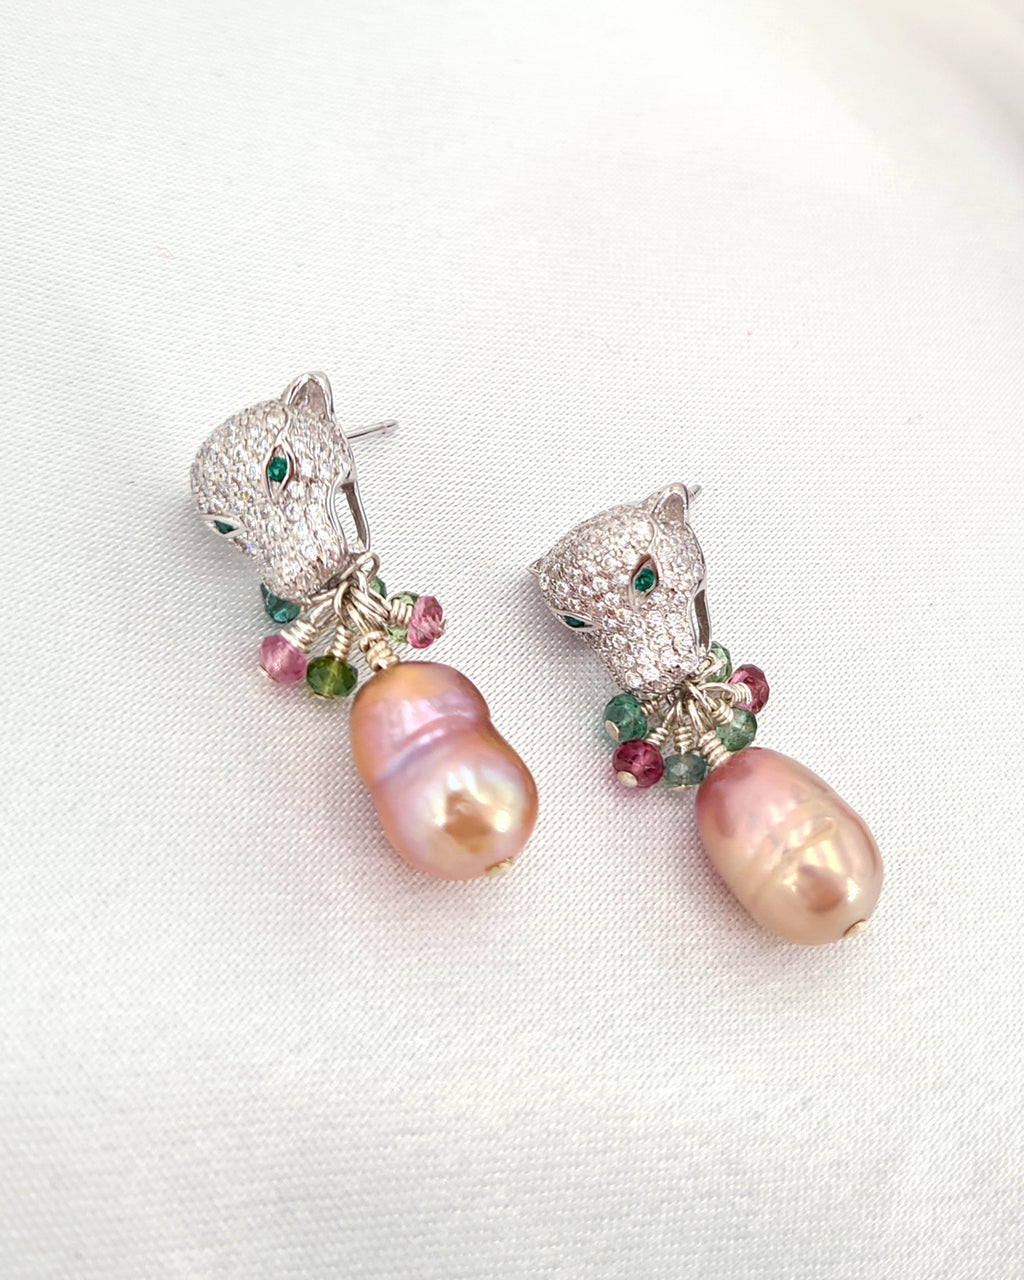 Green Eyed Panther Silver Earrings - Metallic Purple Baroque Edison Pearls - Wedding Bridal Jewelry for Brides and Bridesmaids | Singapore